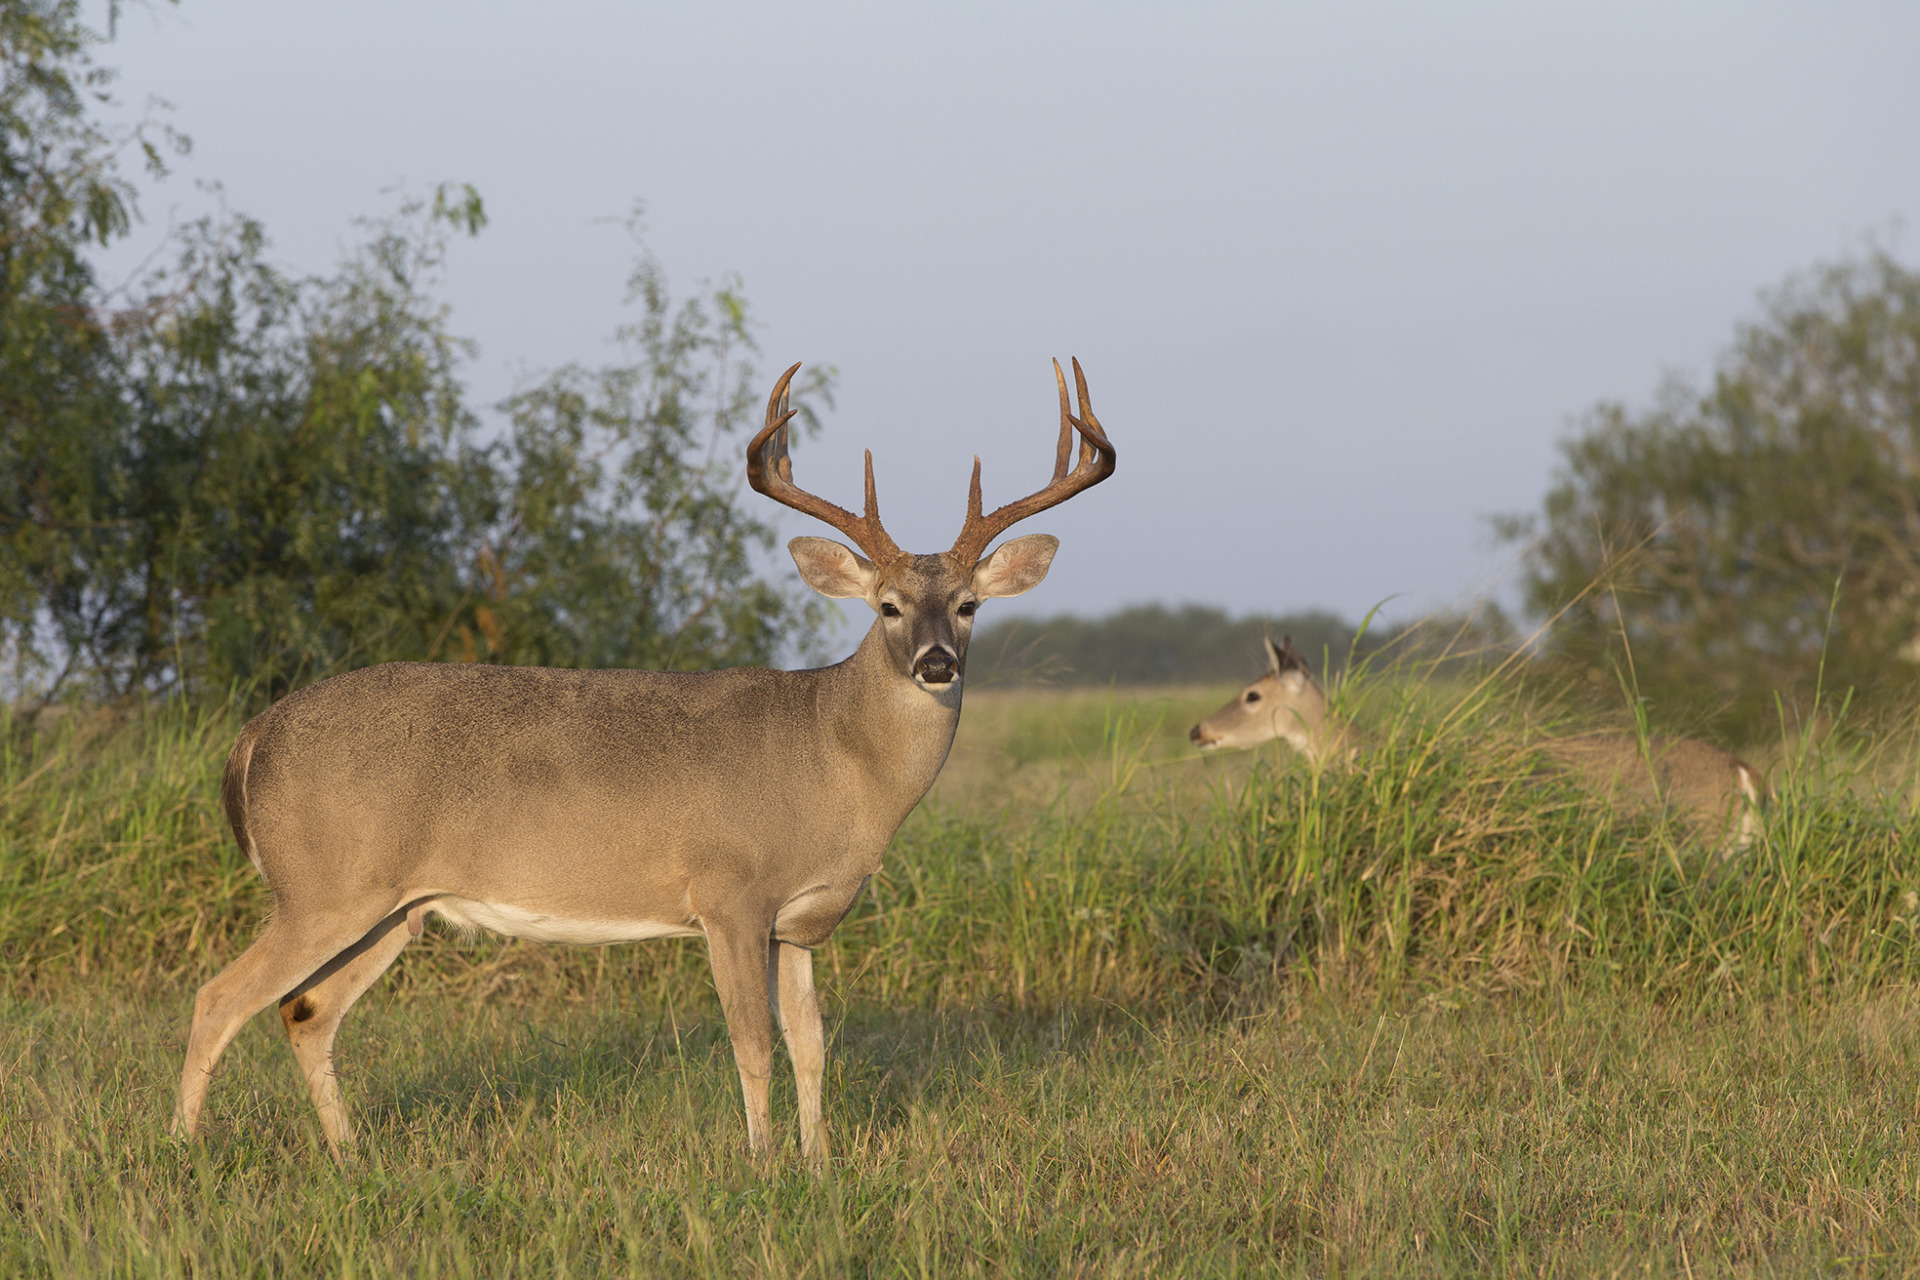 Hunters prepare for opening day of deer season. AgriLife Extension wildlife specialist shares readiness tips.